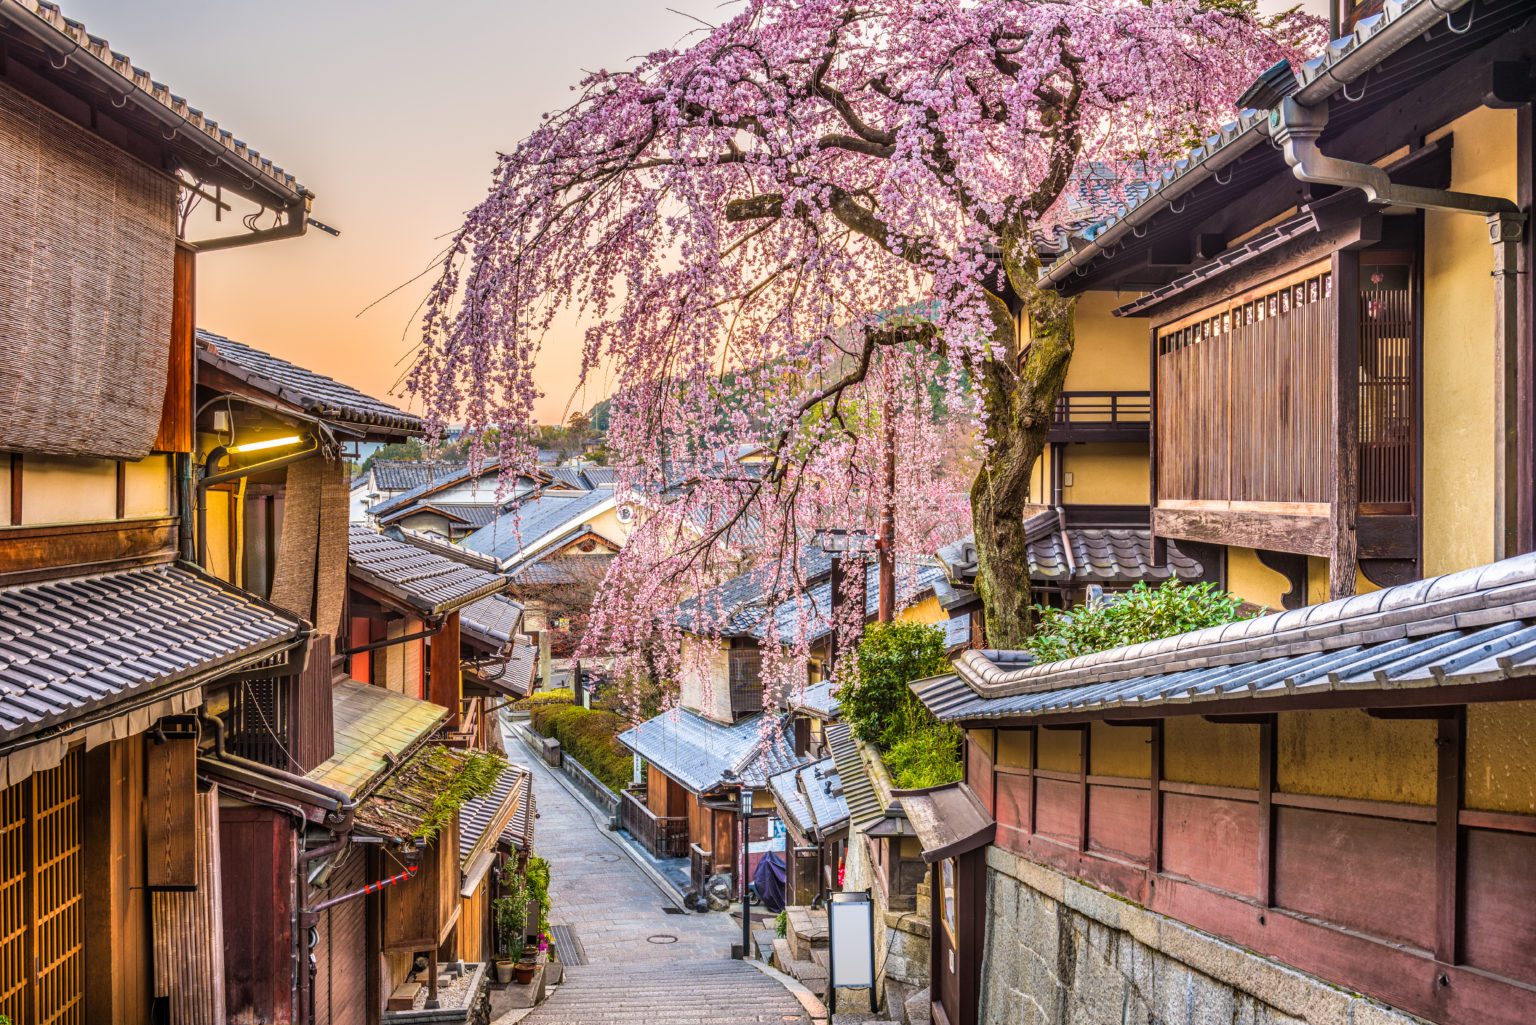 5 Best Places to Live in Japan as an Expat or Foreigner